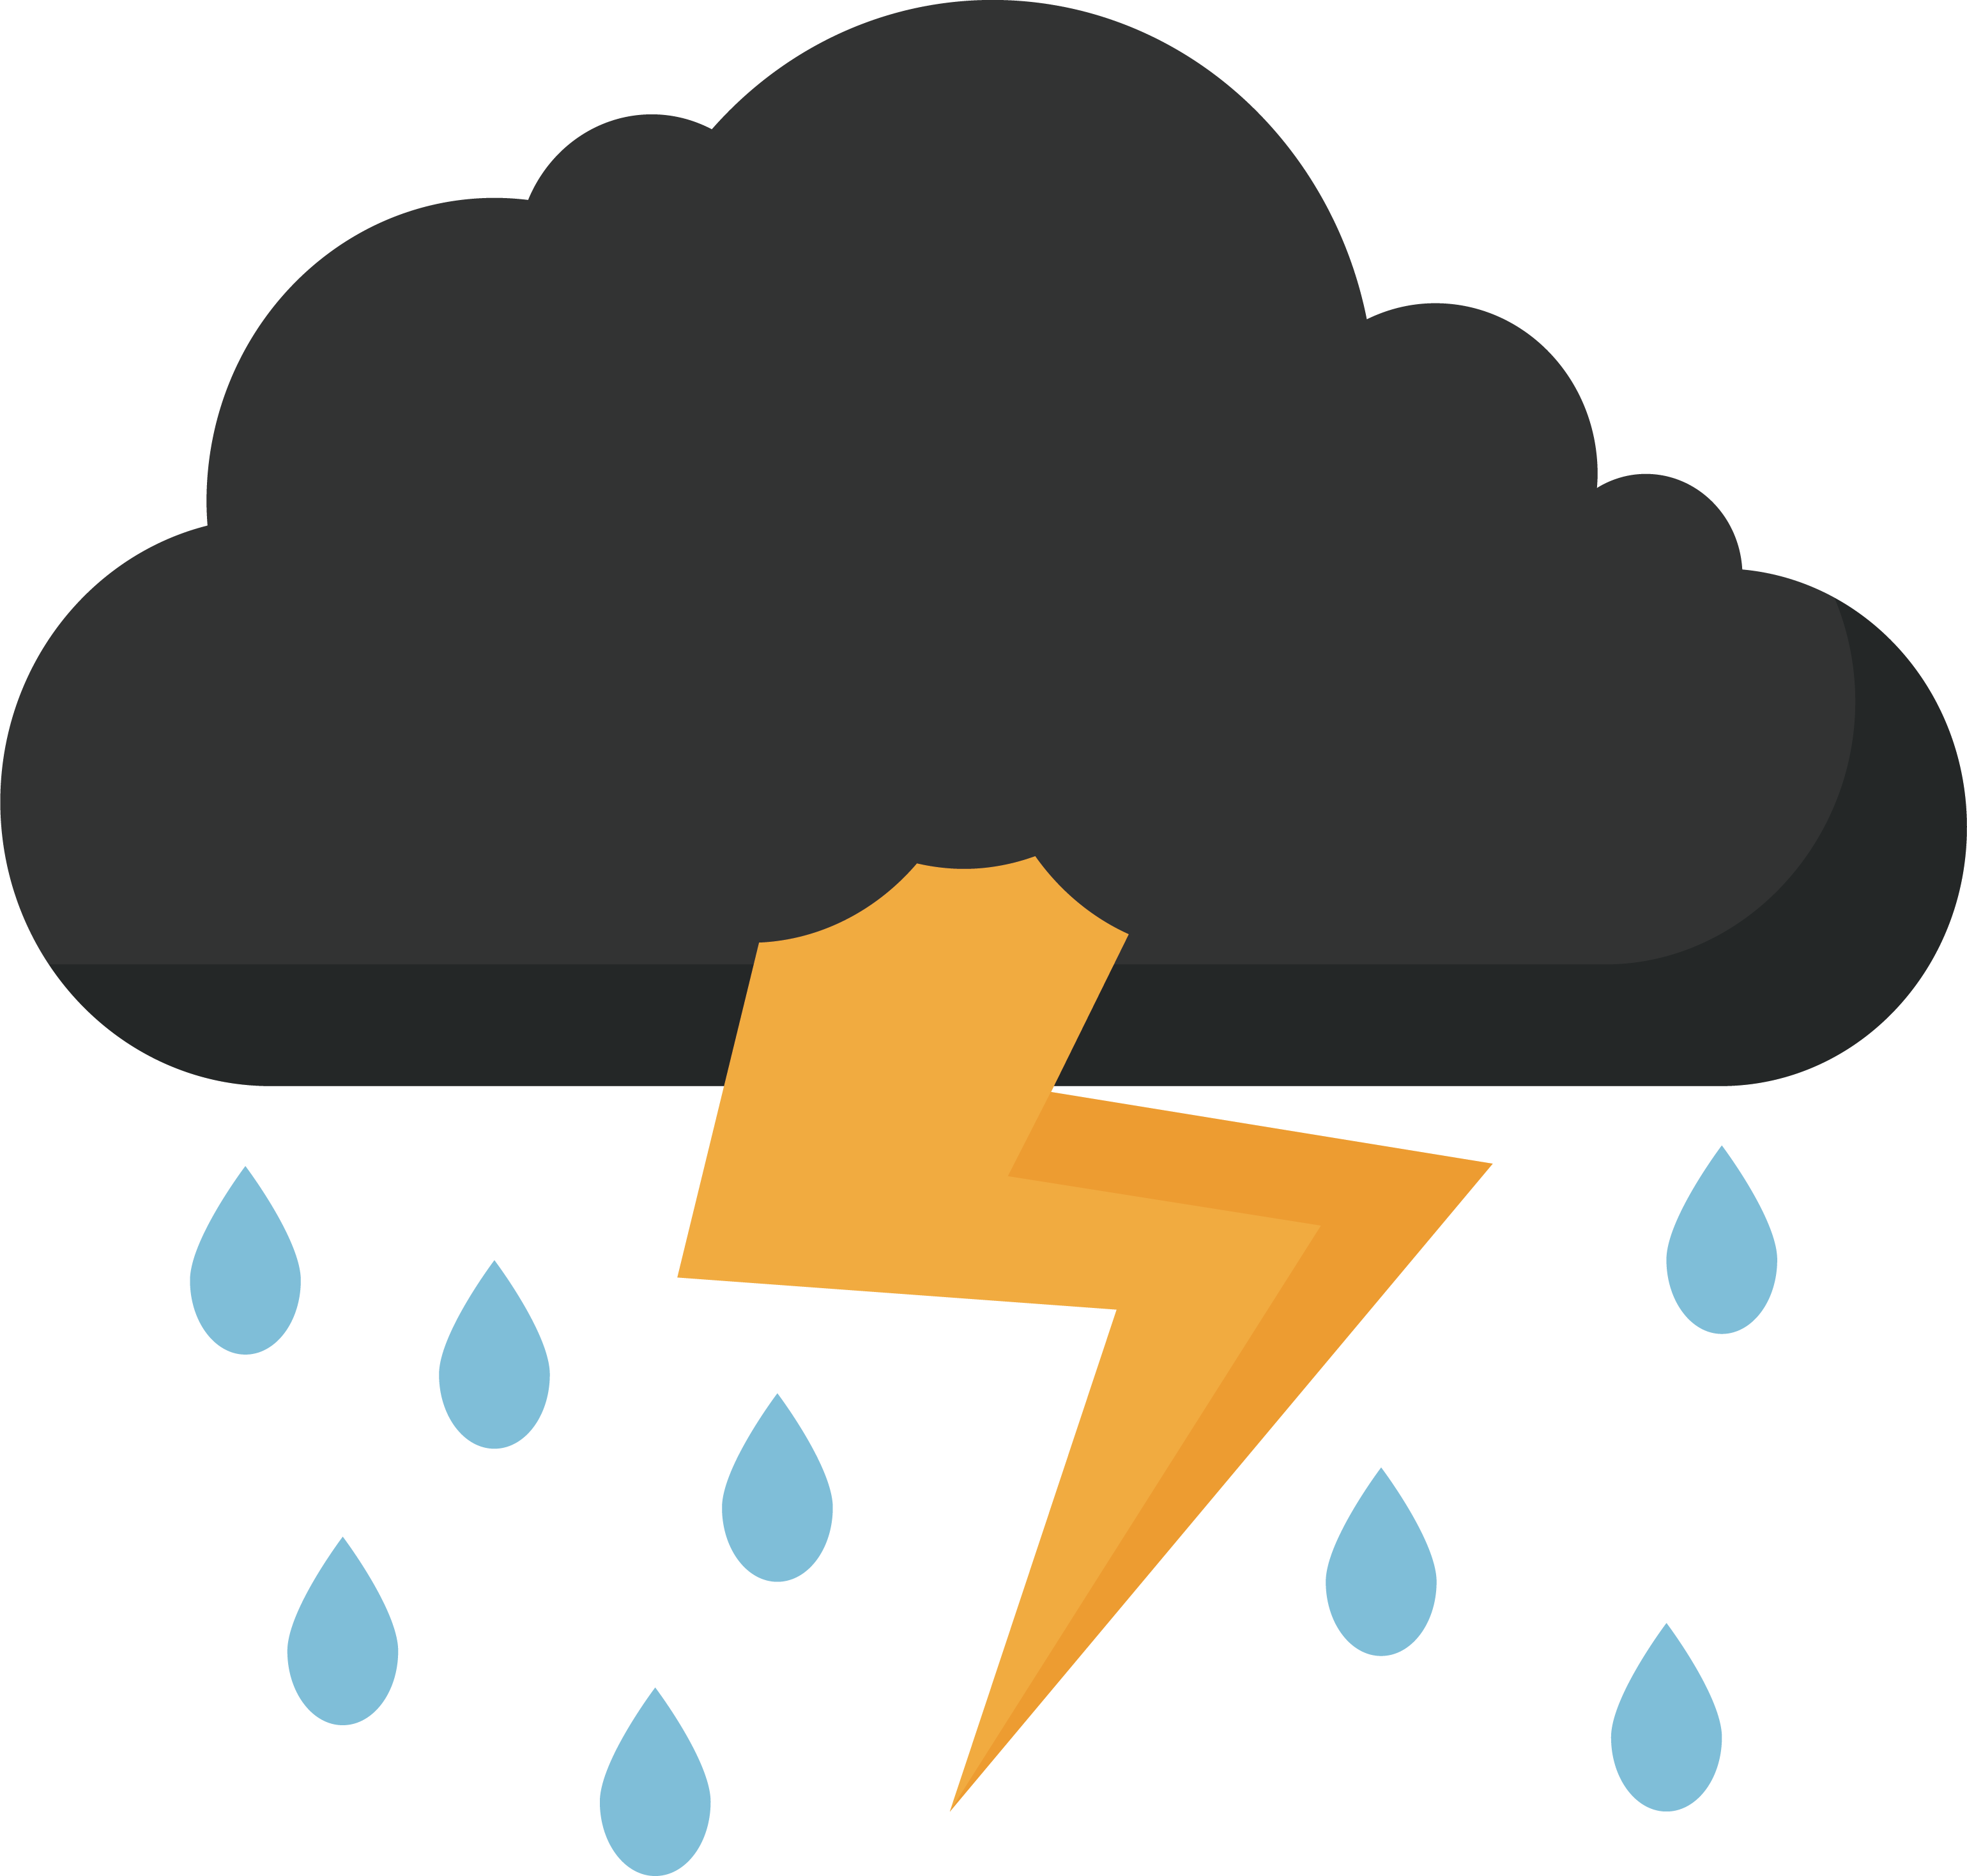 Thunderstorm Icon Graphic PNG